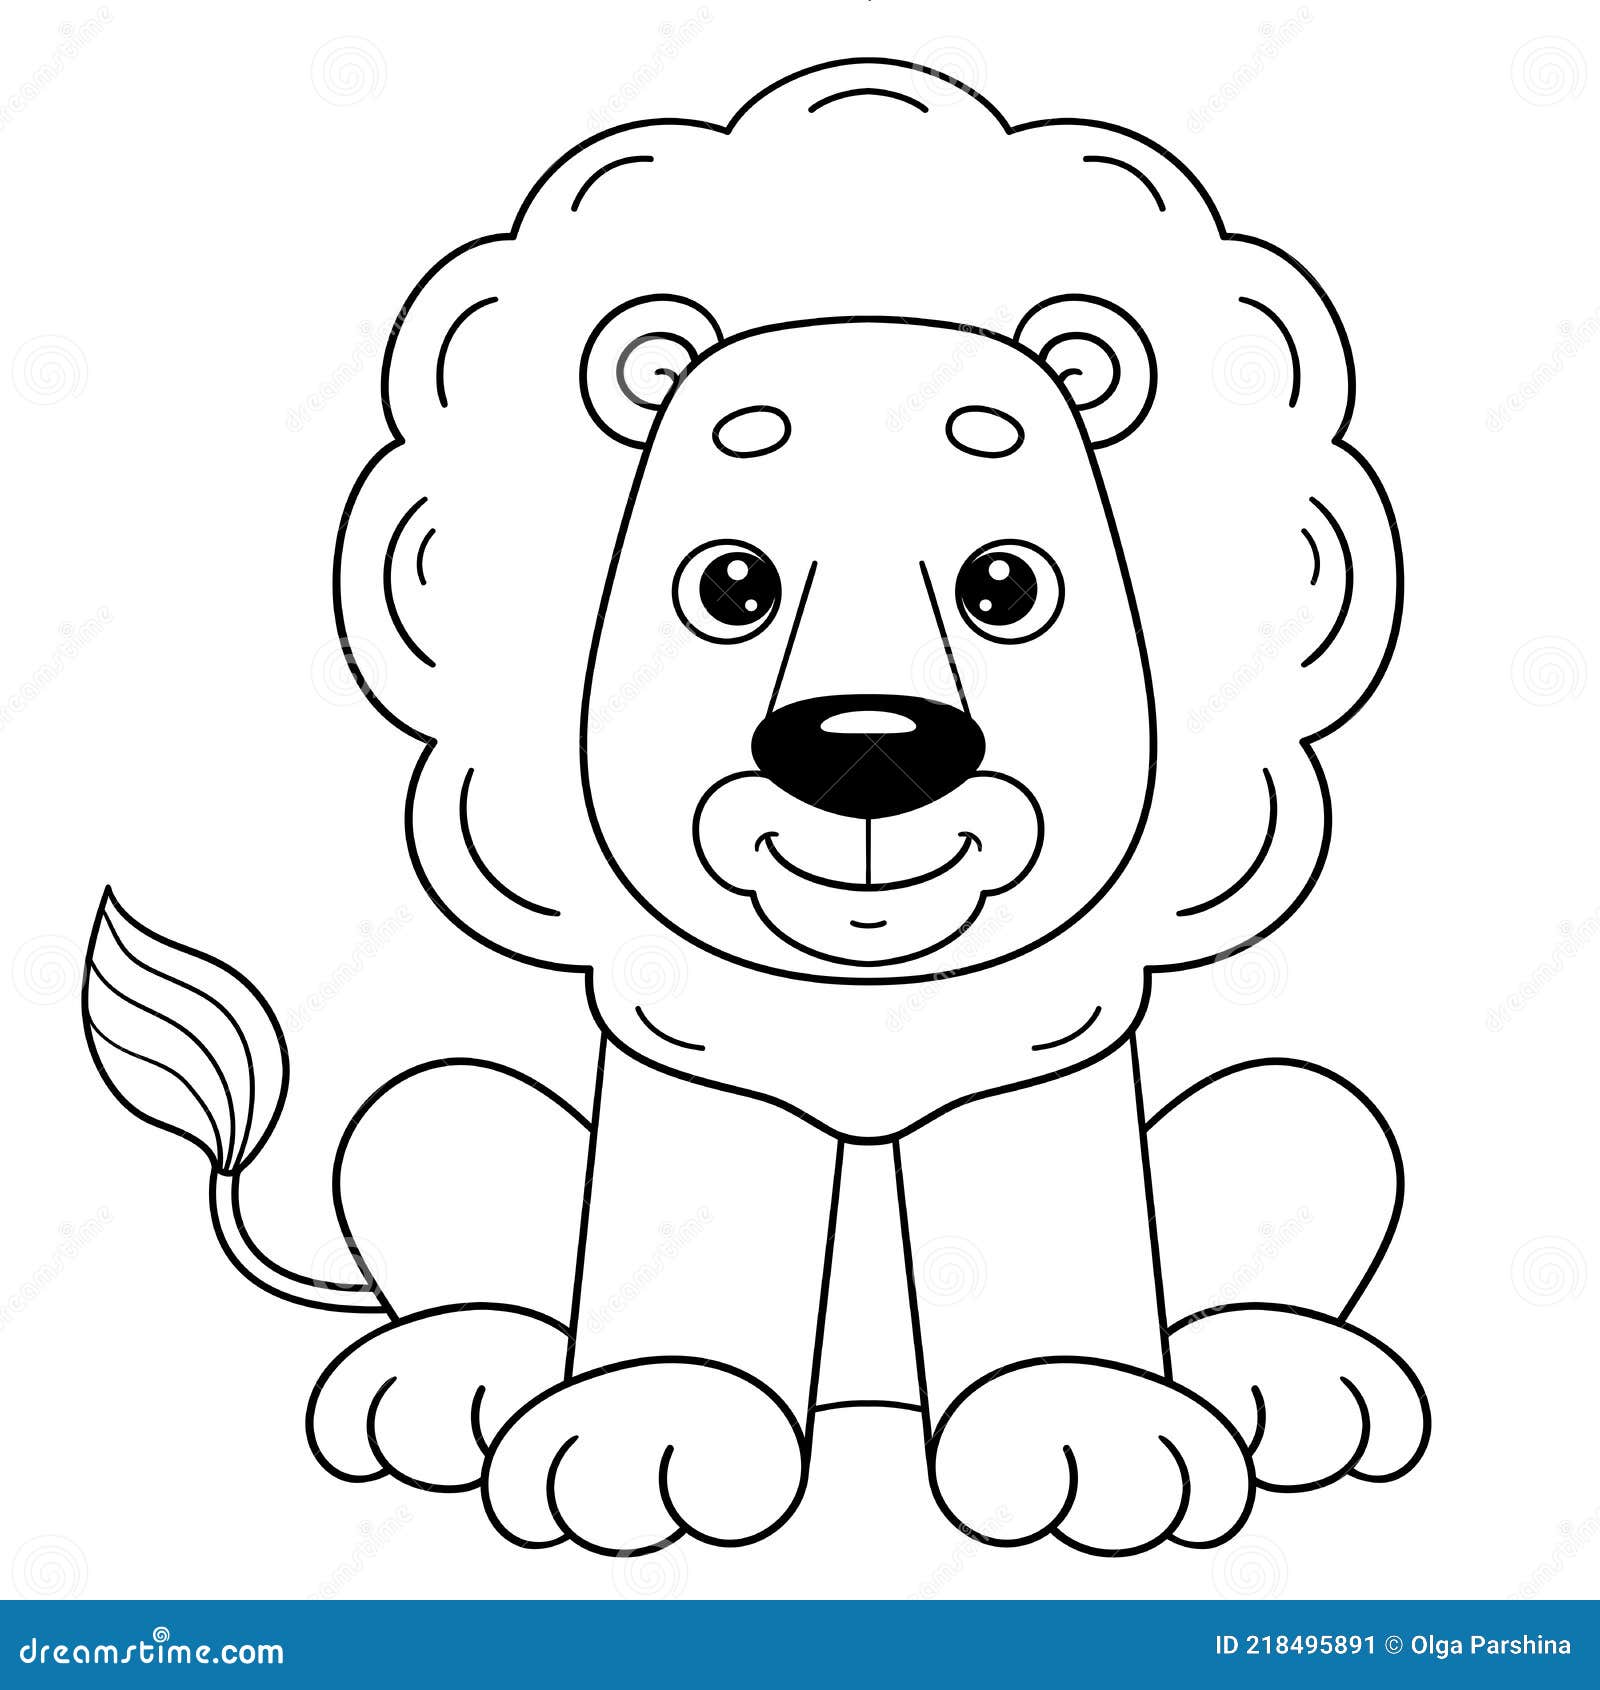 Coloring Page Outline of Cartoon Cute Lion. Coloring Book for Kids ...